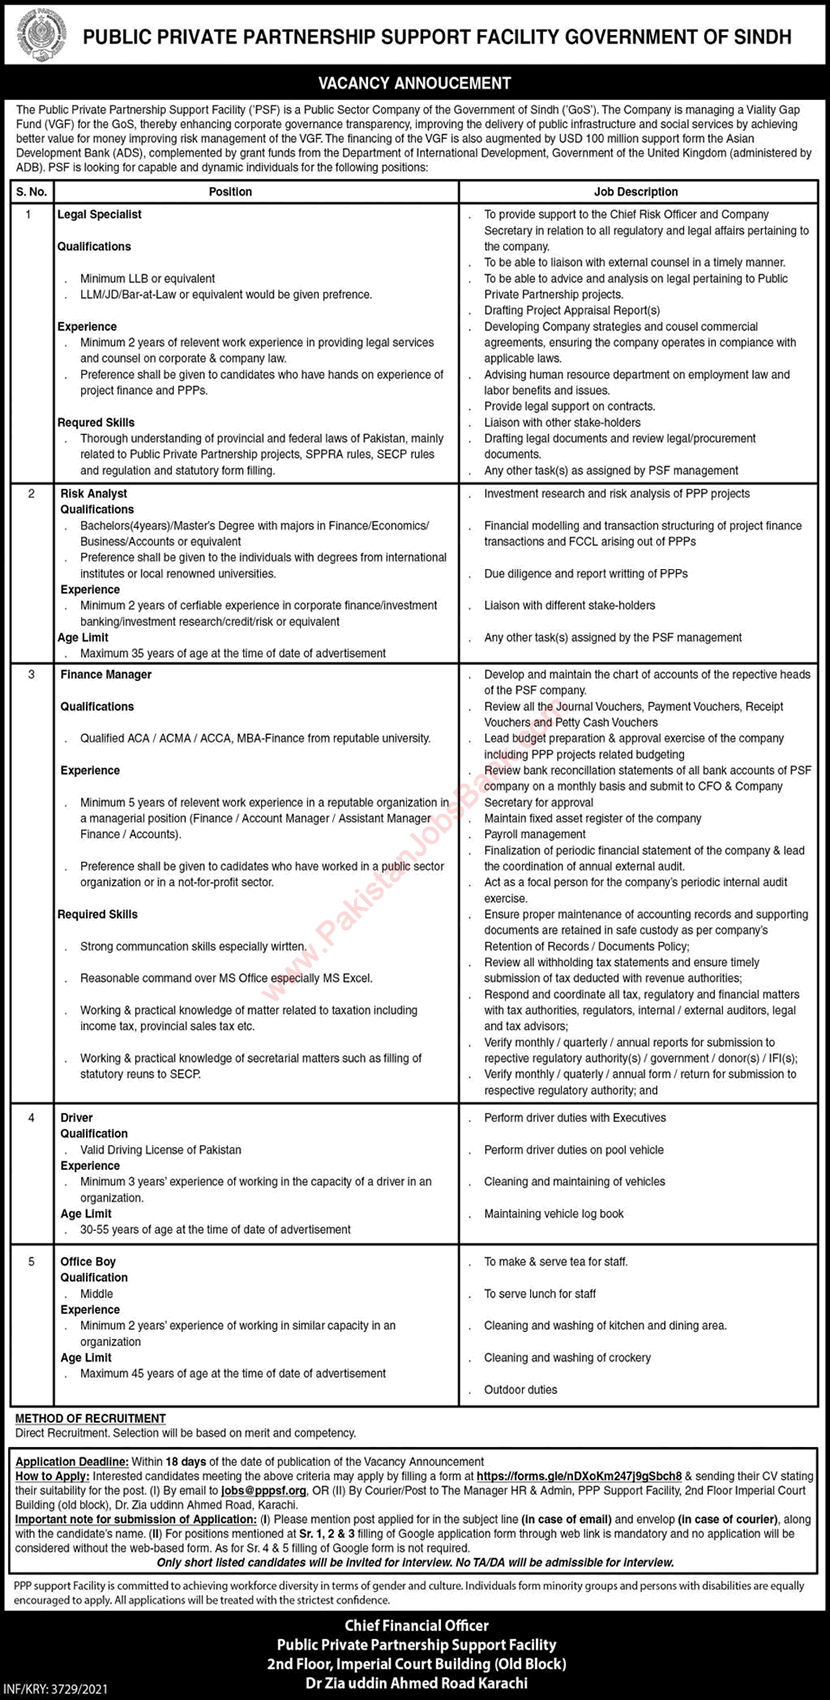 Public Private Partnership Support Facility Sindh Jobs 2021 October PSF Latest